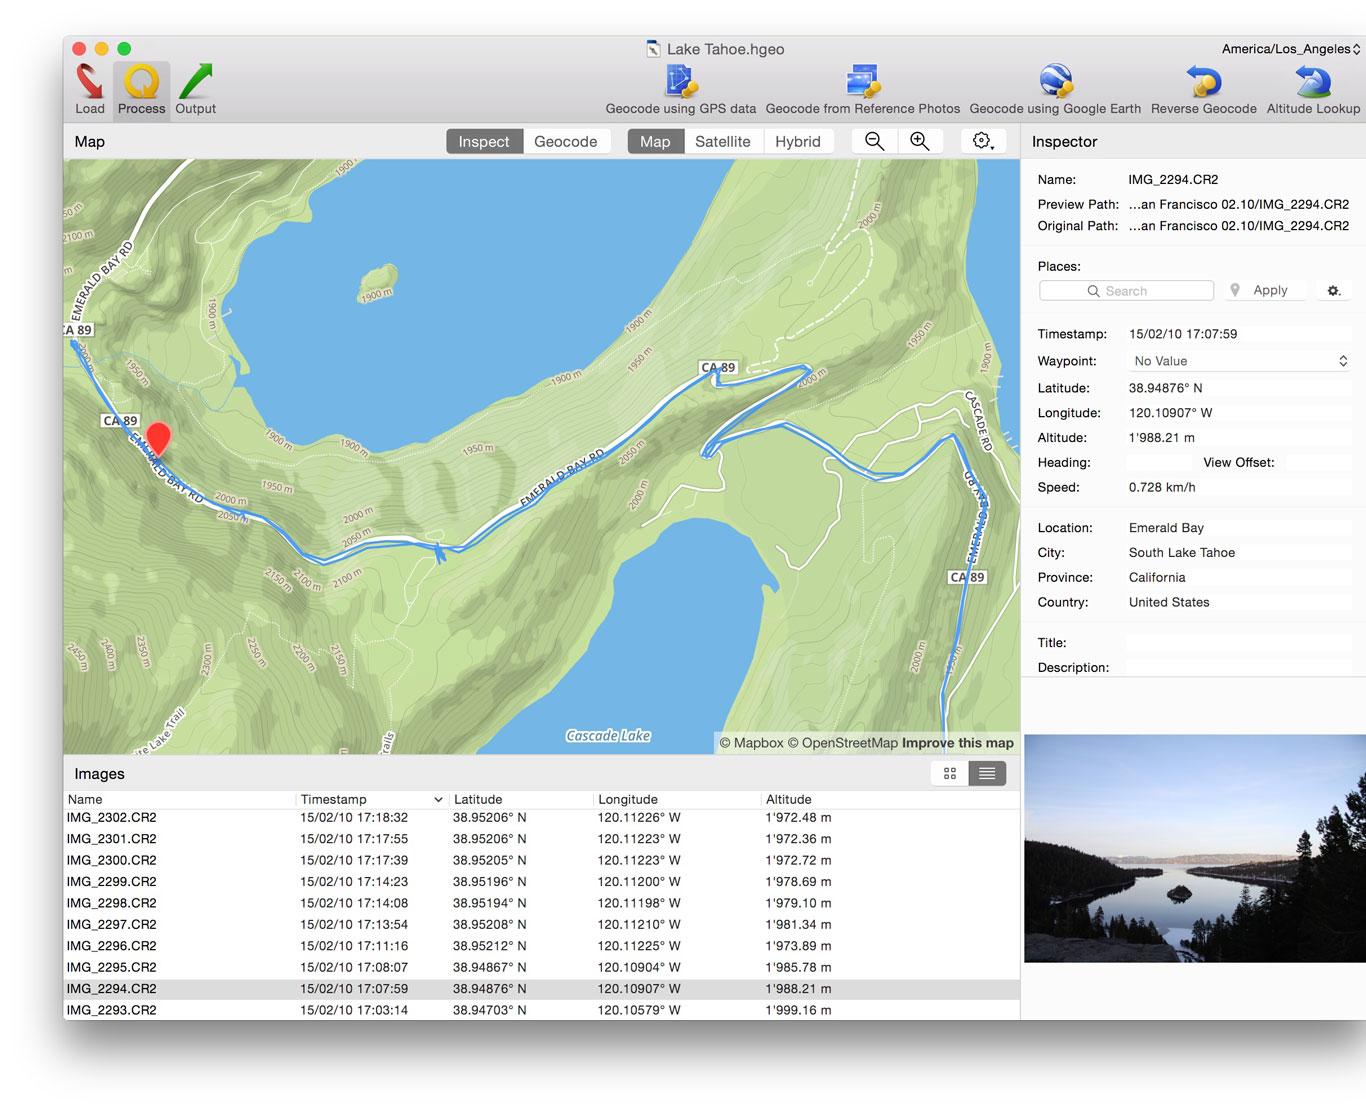 iphoto for mac 10.6